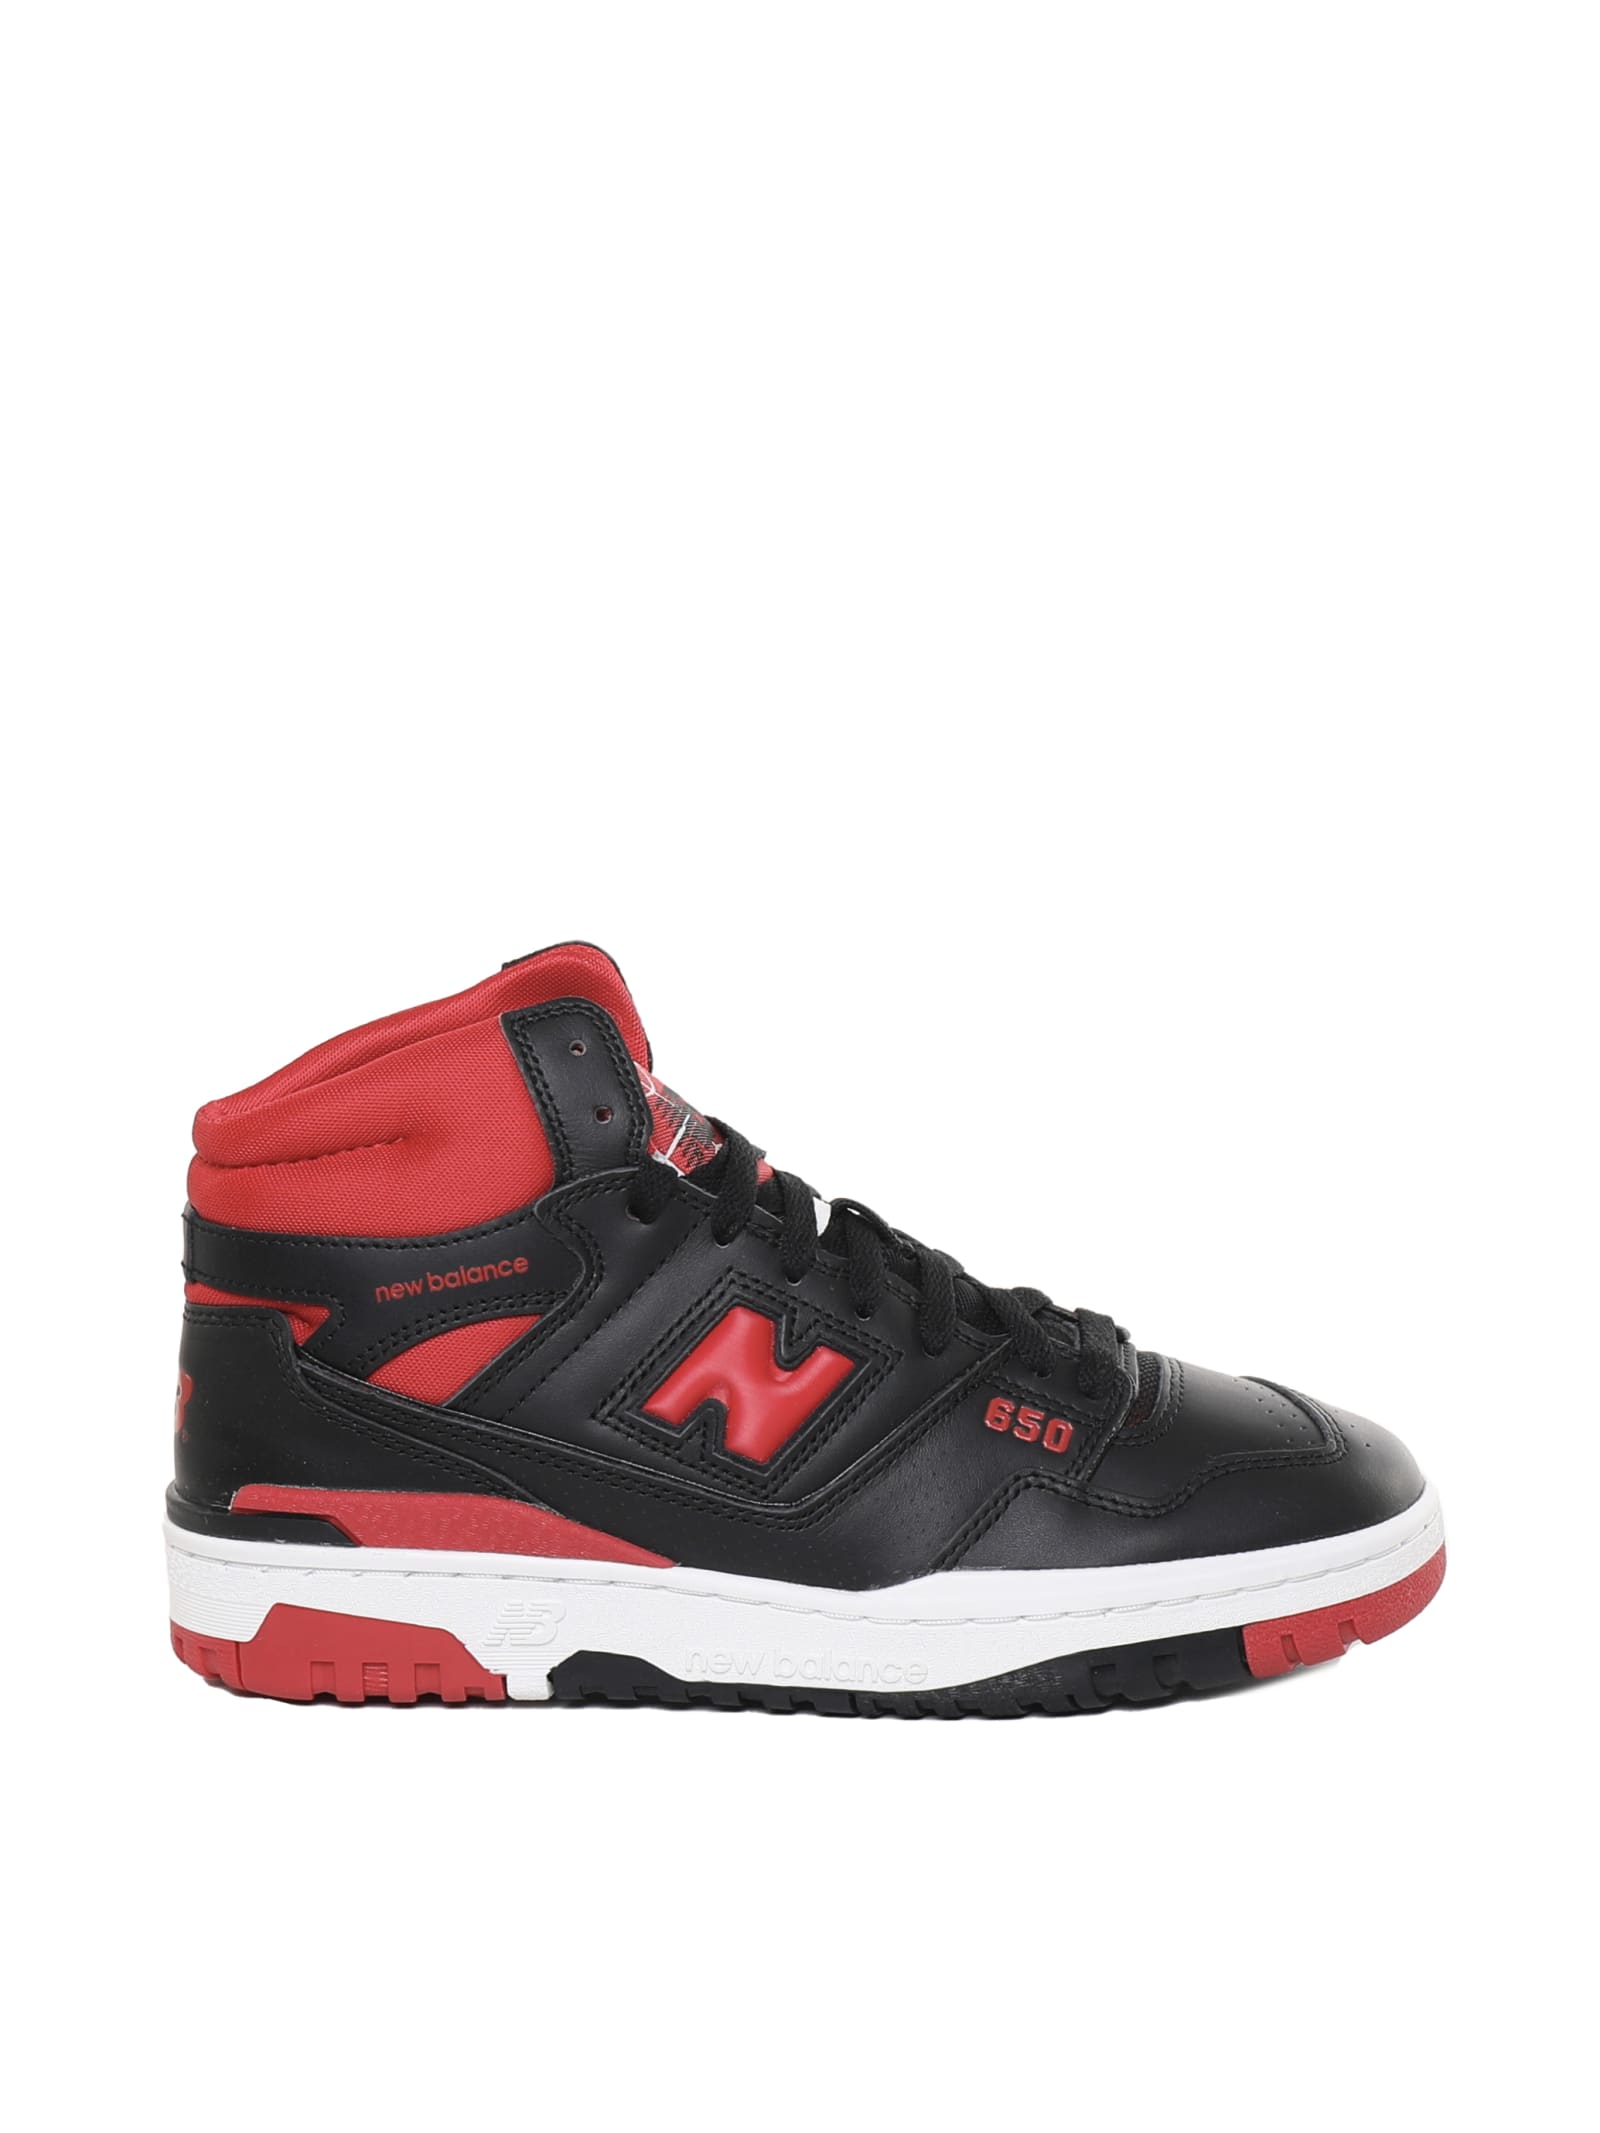 New Balance Sneakers Bb650 In Black/red